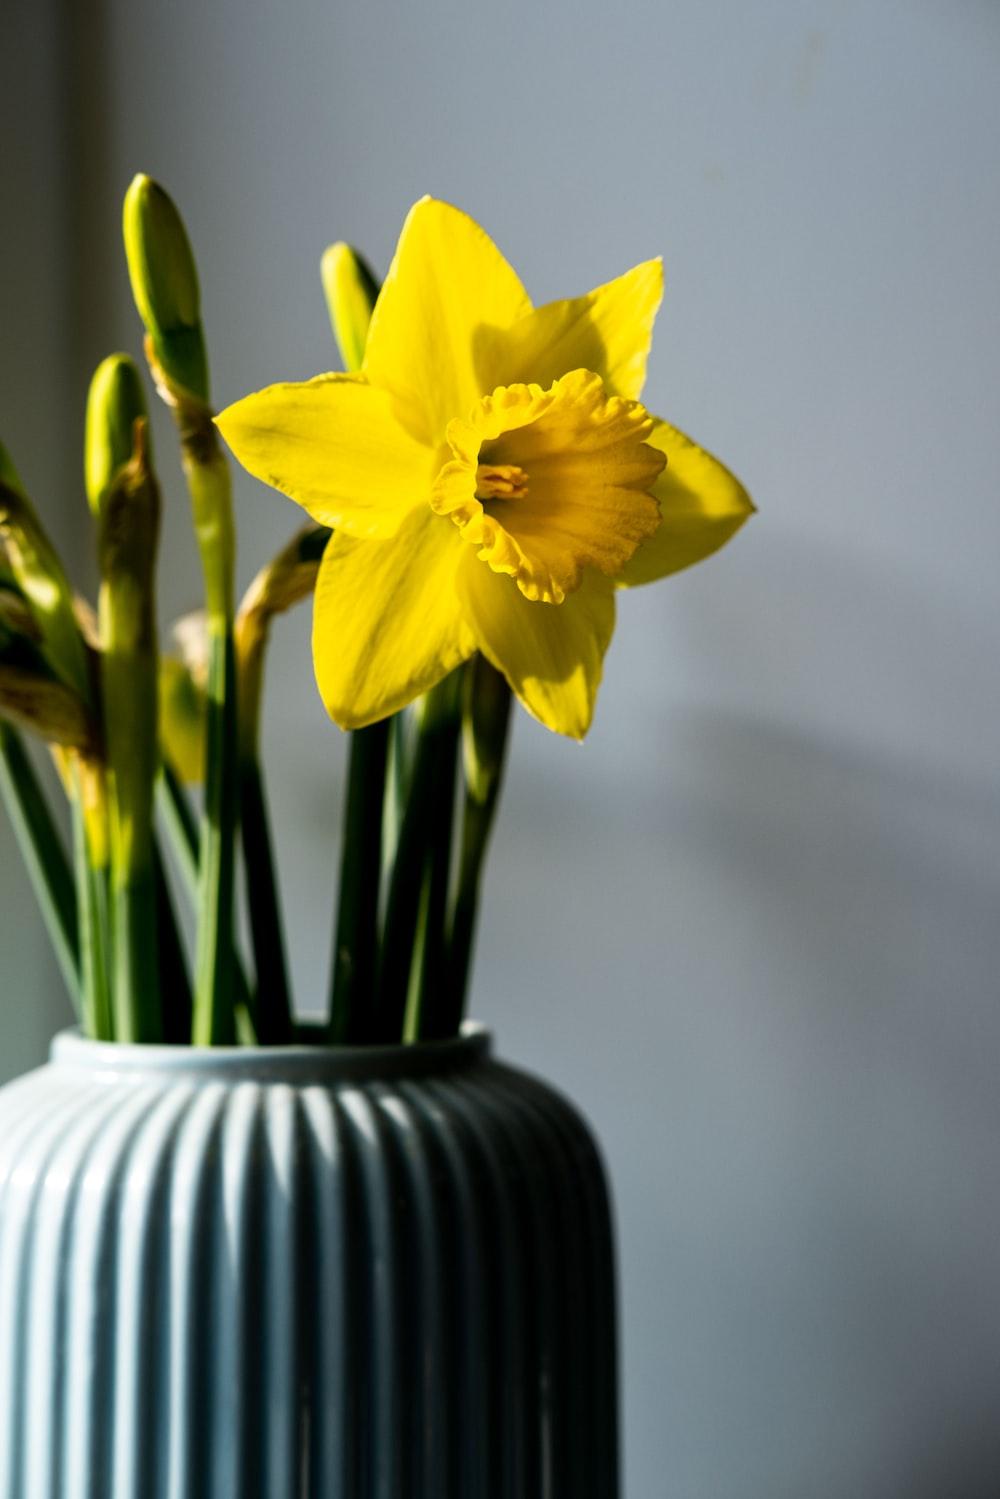 Daffodil Pictures Download Free Images on